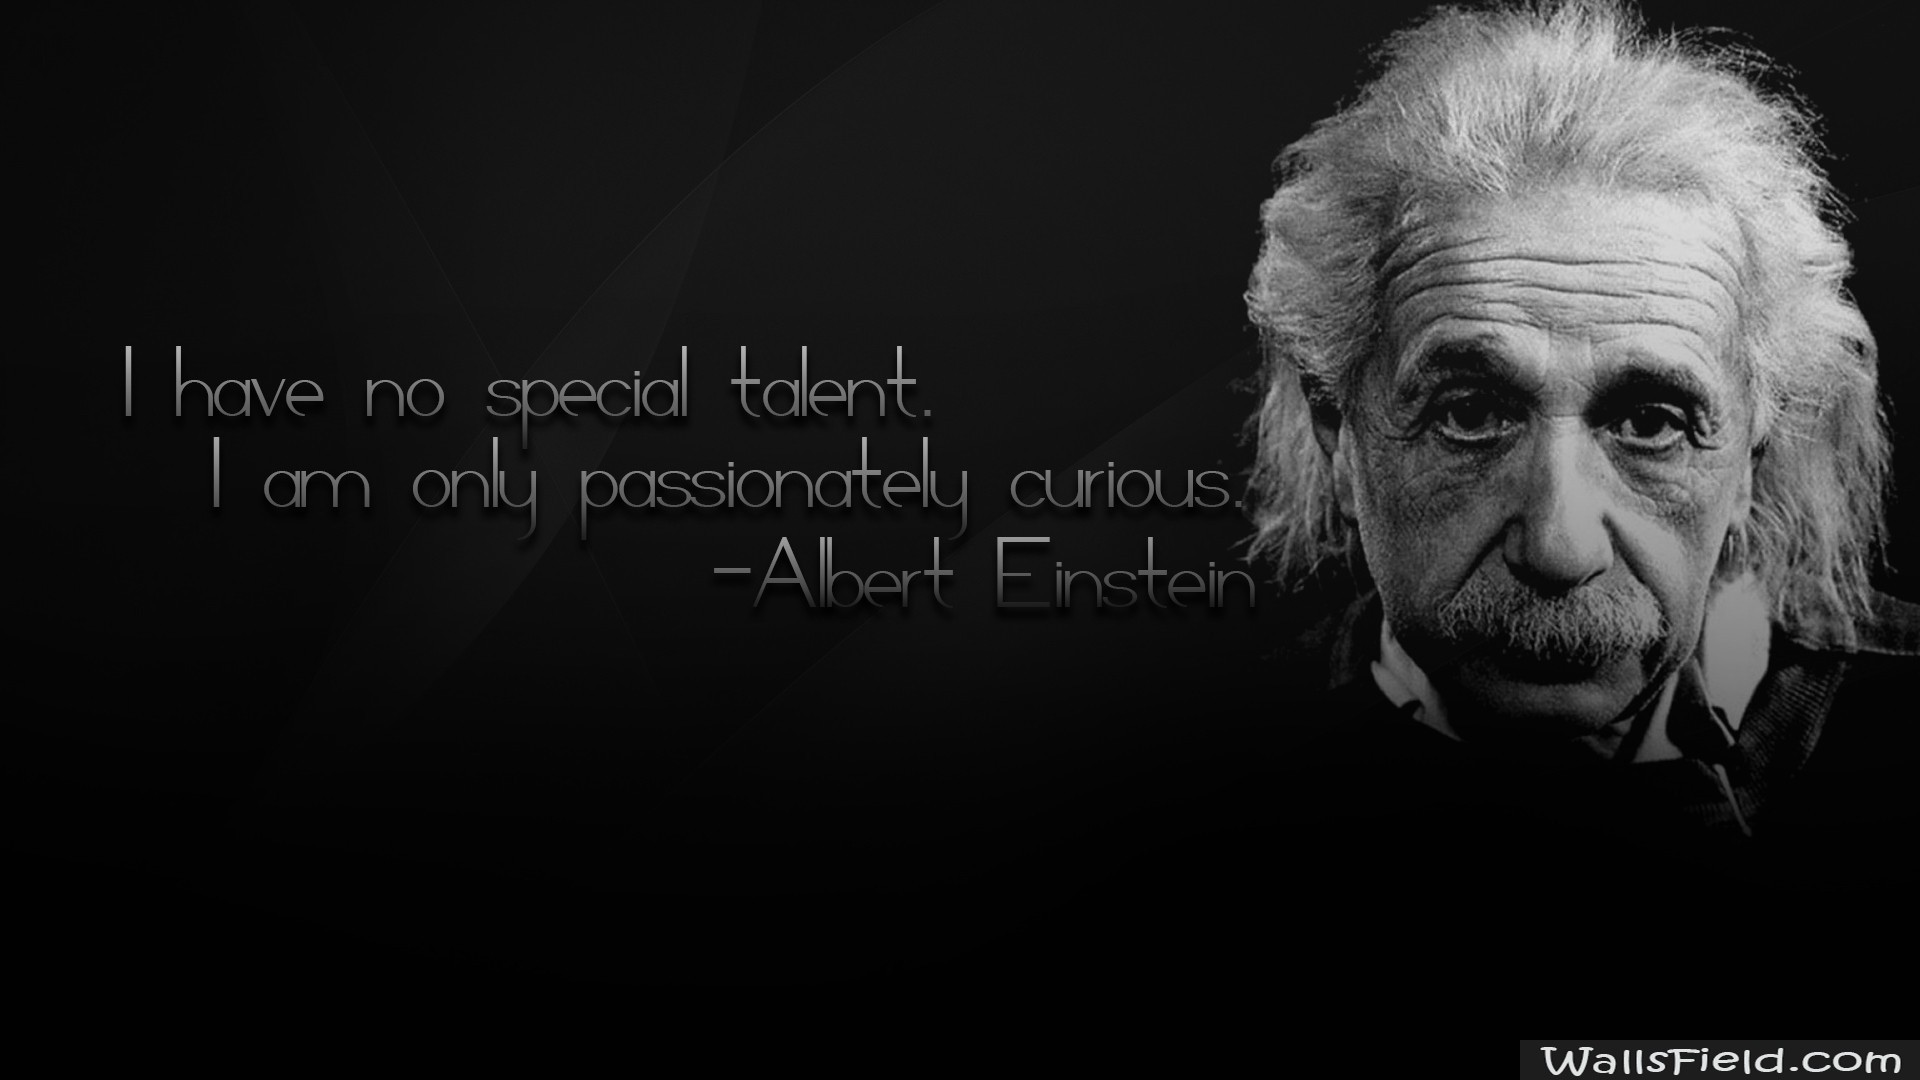 einstein wallpaper hd,text,head,font,black and white,monochrome photography